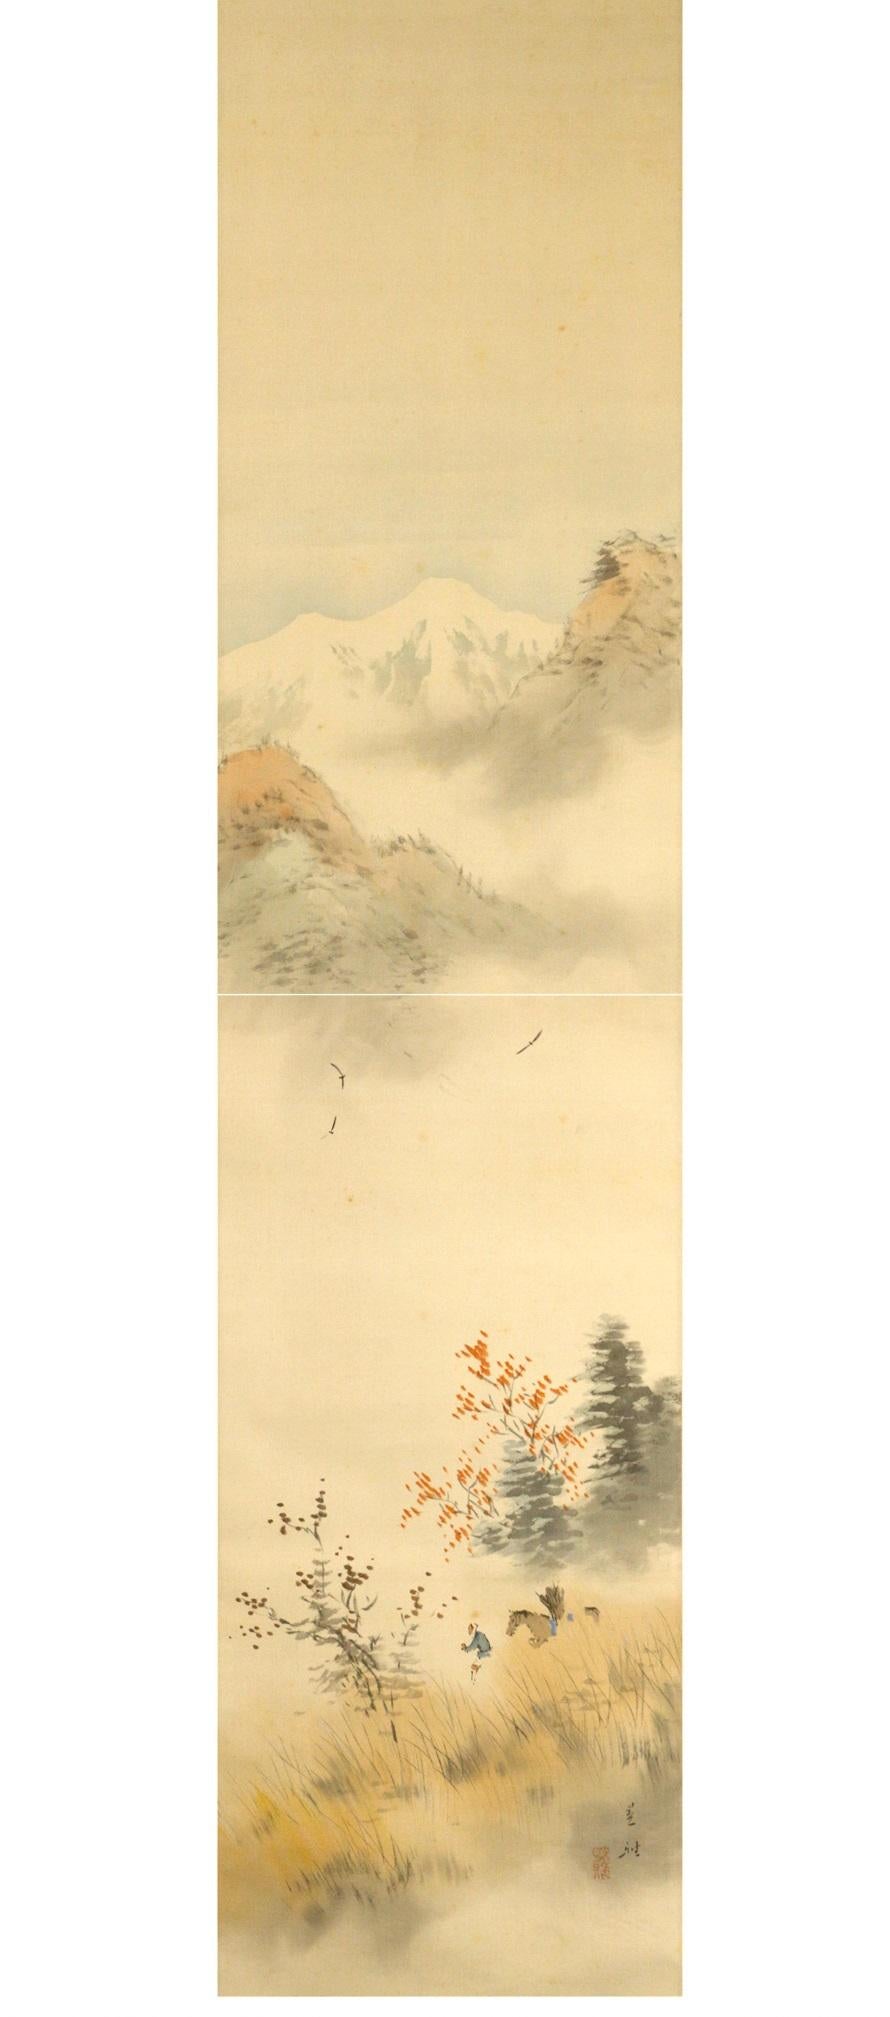 Autumn Scene Meiji Period Scroll Japan 19c Artist Marked Nihonga Style In Good Condition For Sale In Amsterdam, Noord Holland